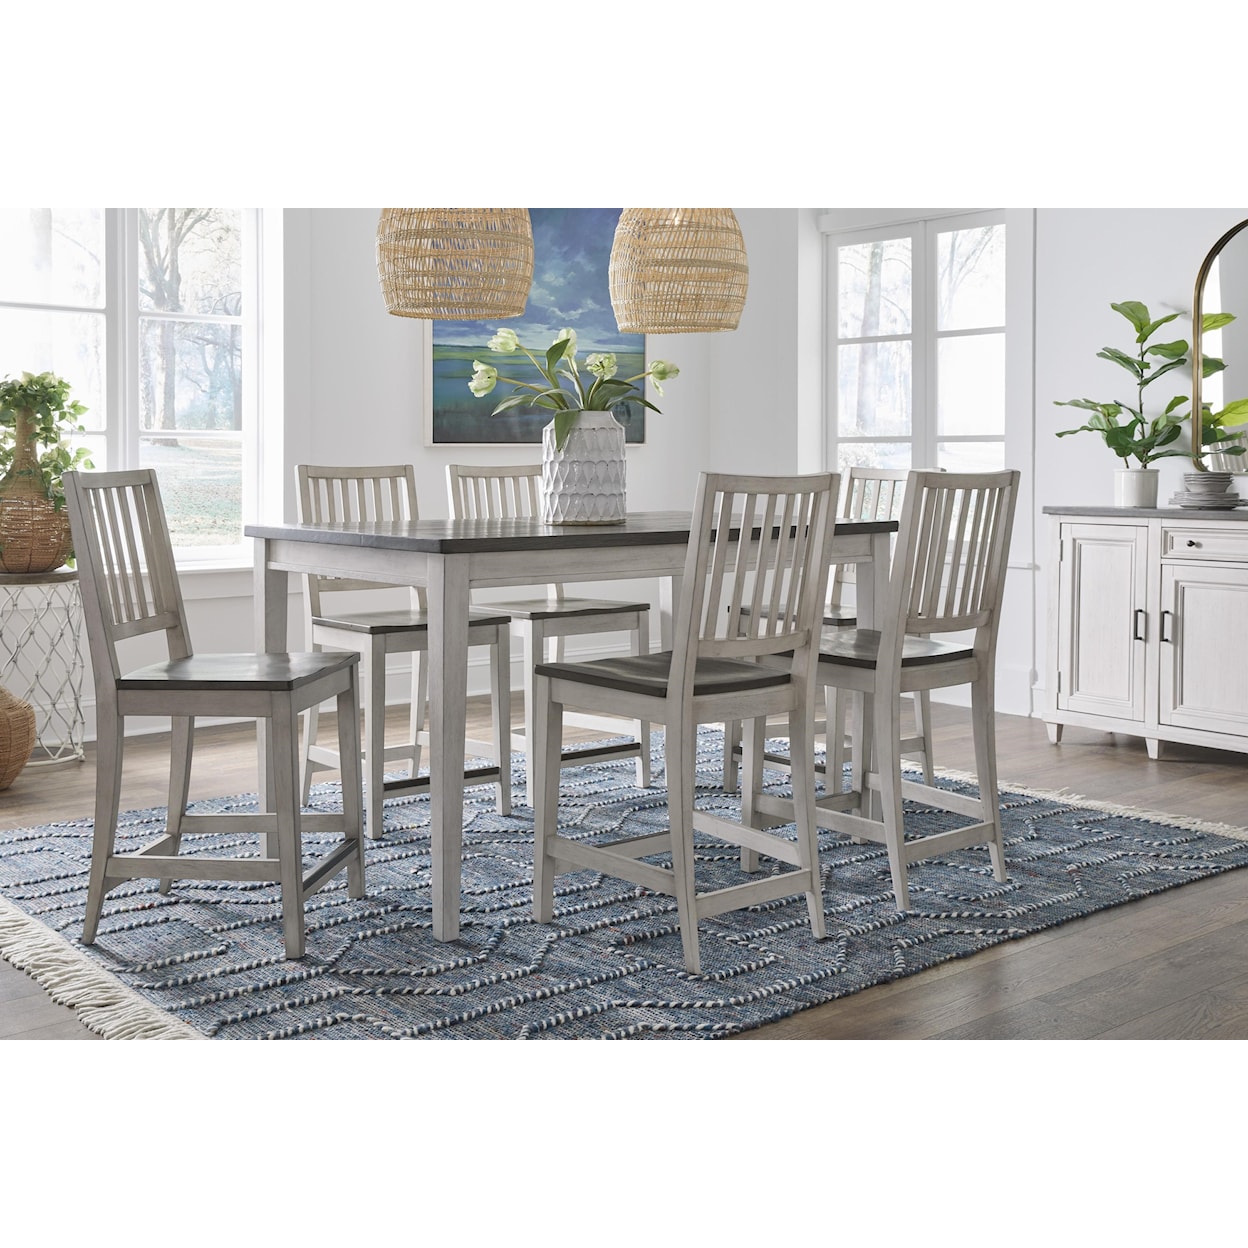 Aspenhome Caraway Caraway Table x 4 Sides